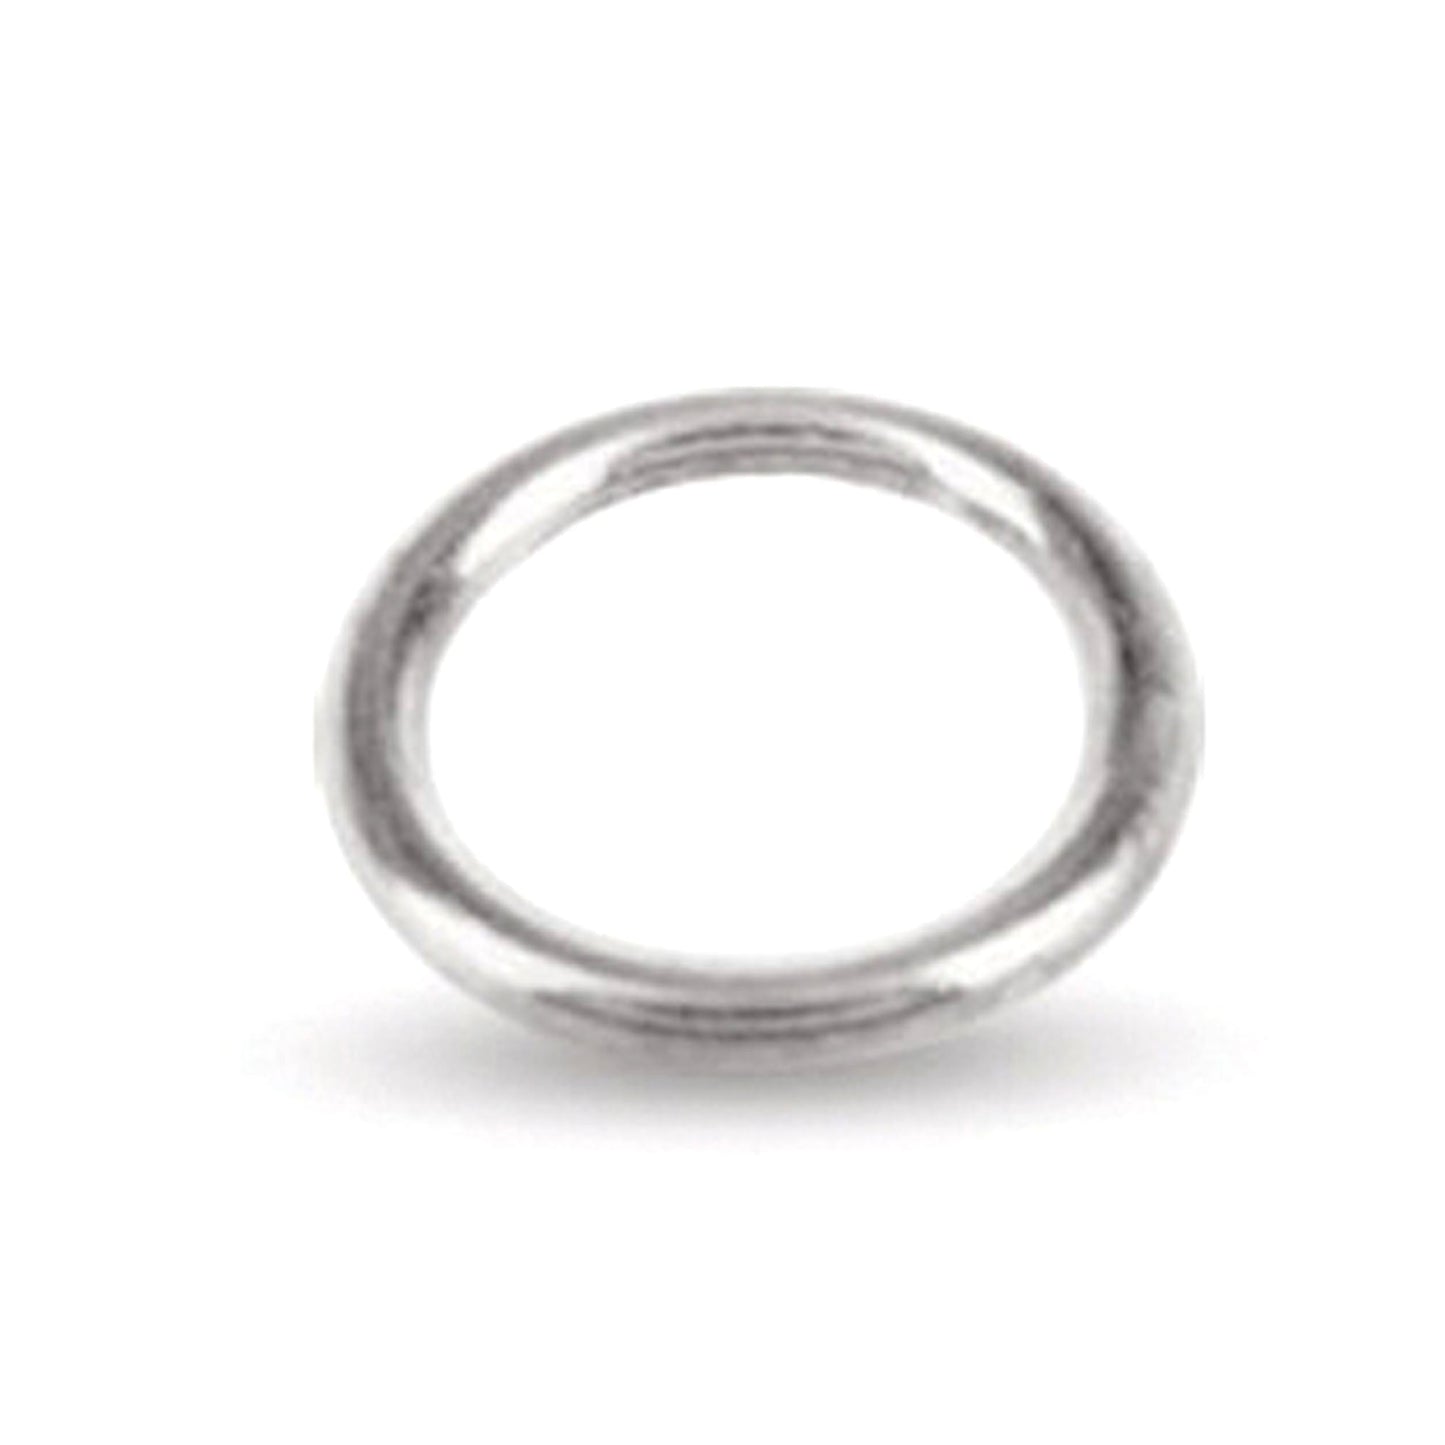 Jump Rings - 7mm x 1.0mm Thickness Closed | SS-JR7C1.0 | Jewellery Making Supply